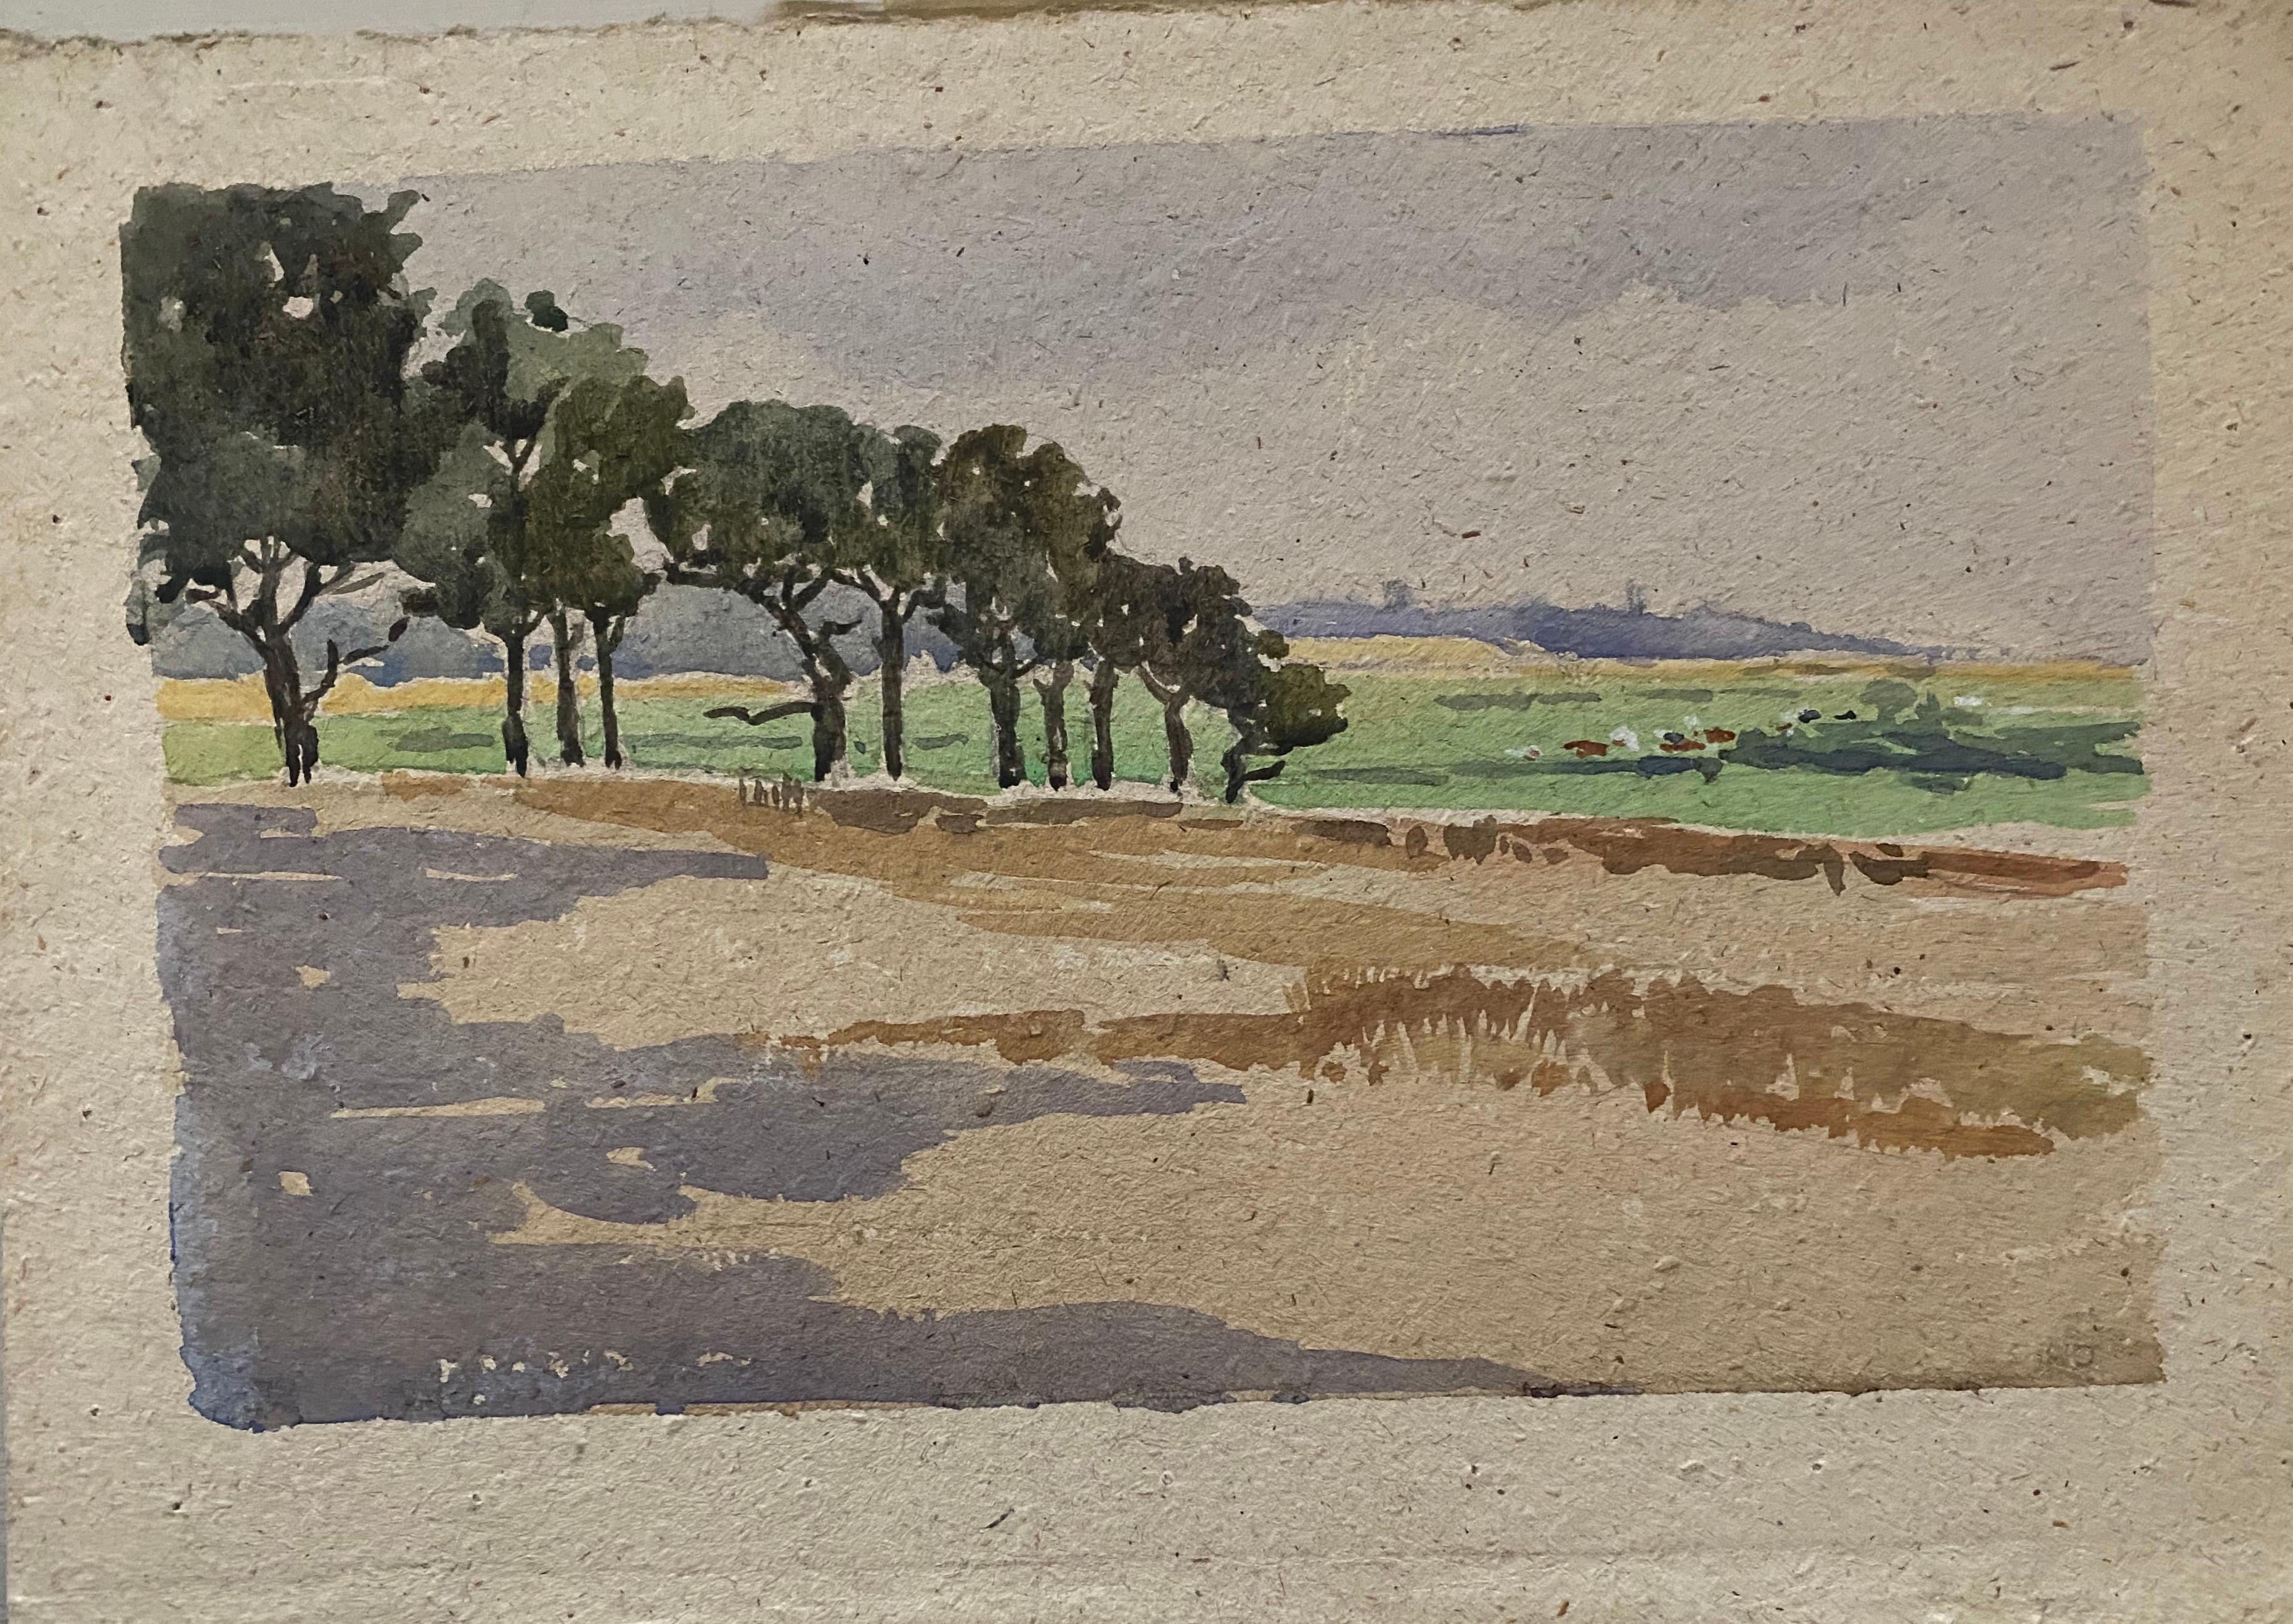 Green Fields
English School, early 1900's
Original watercolor painting on artists paper, unframed
Overall paper size: 8 x 11.25 inches


From a large private collection of English watercolor paintings, all by the same hand, we offer this